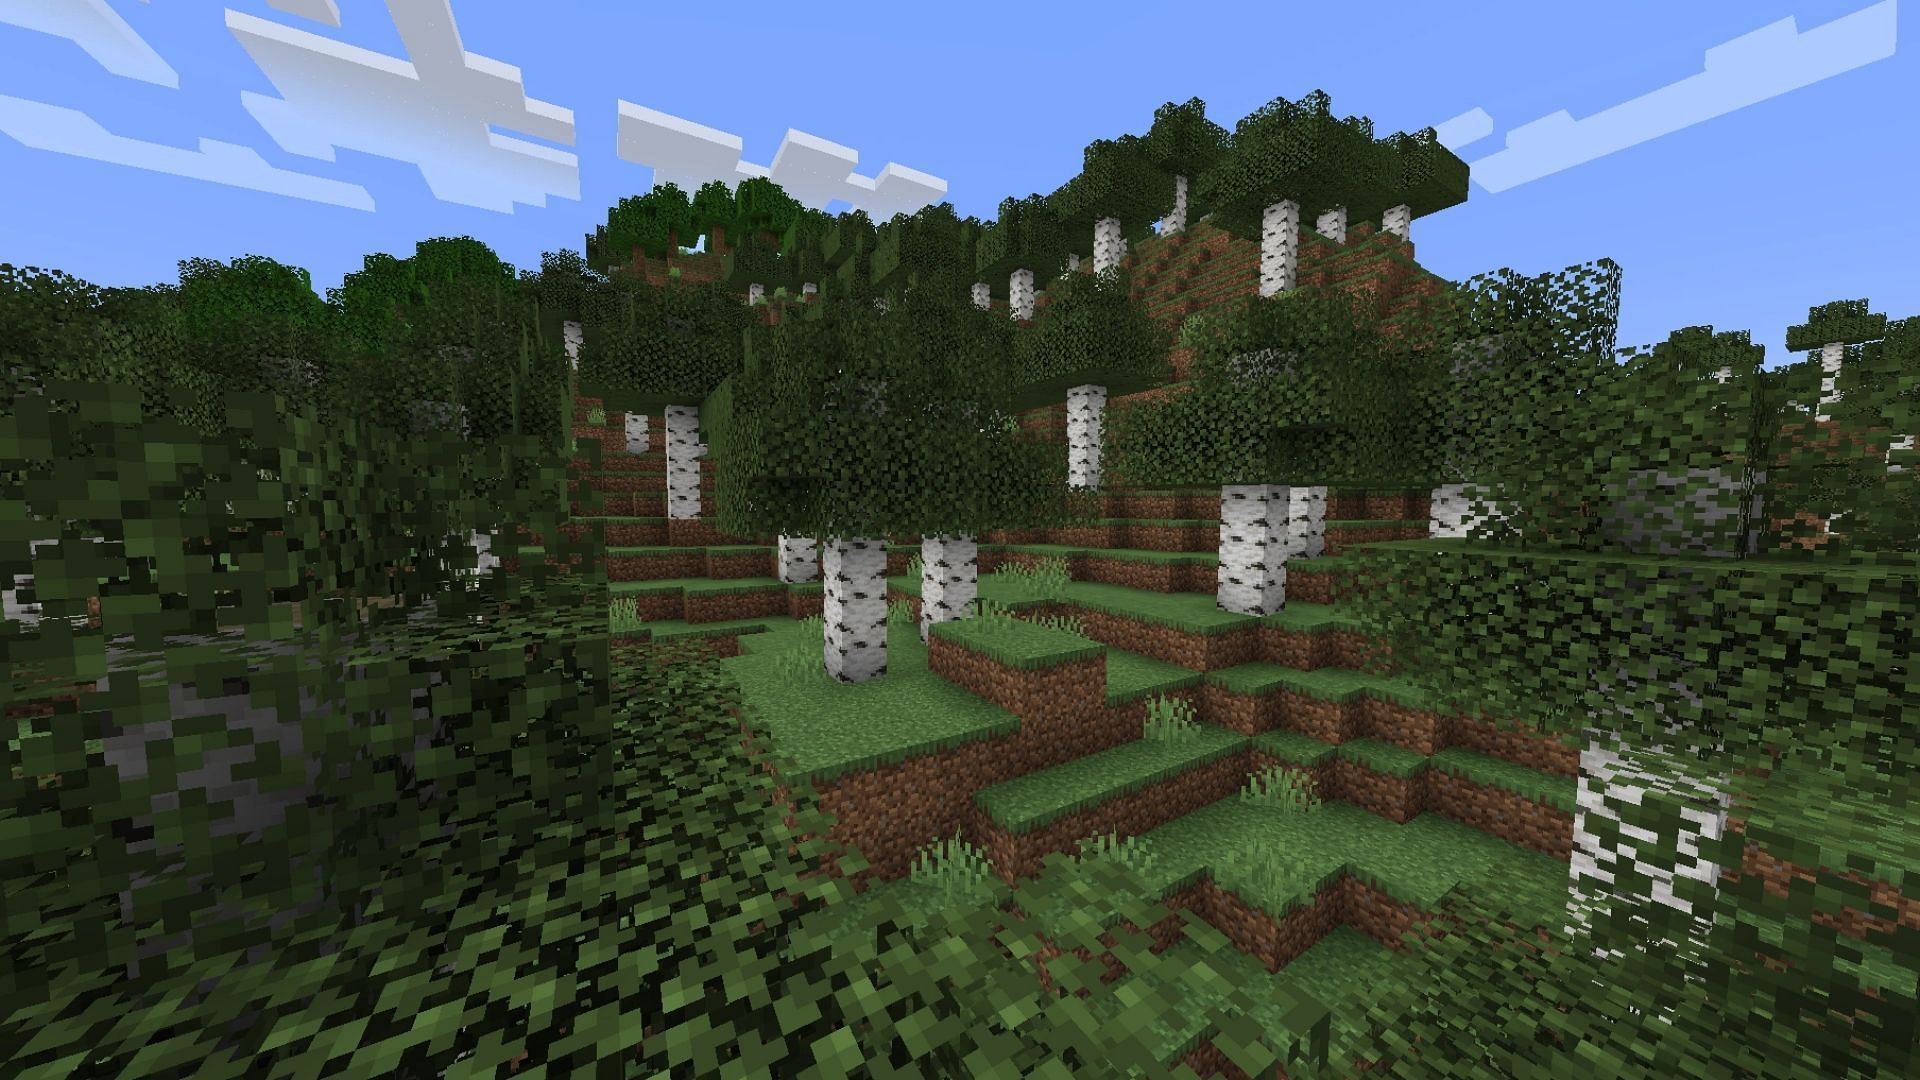 Birch Forest was about to receive a overhaul in the 1.19 update (Image via Minecraft Wiki)